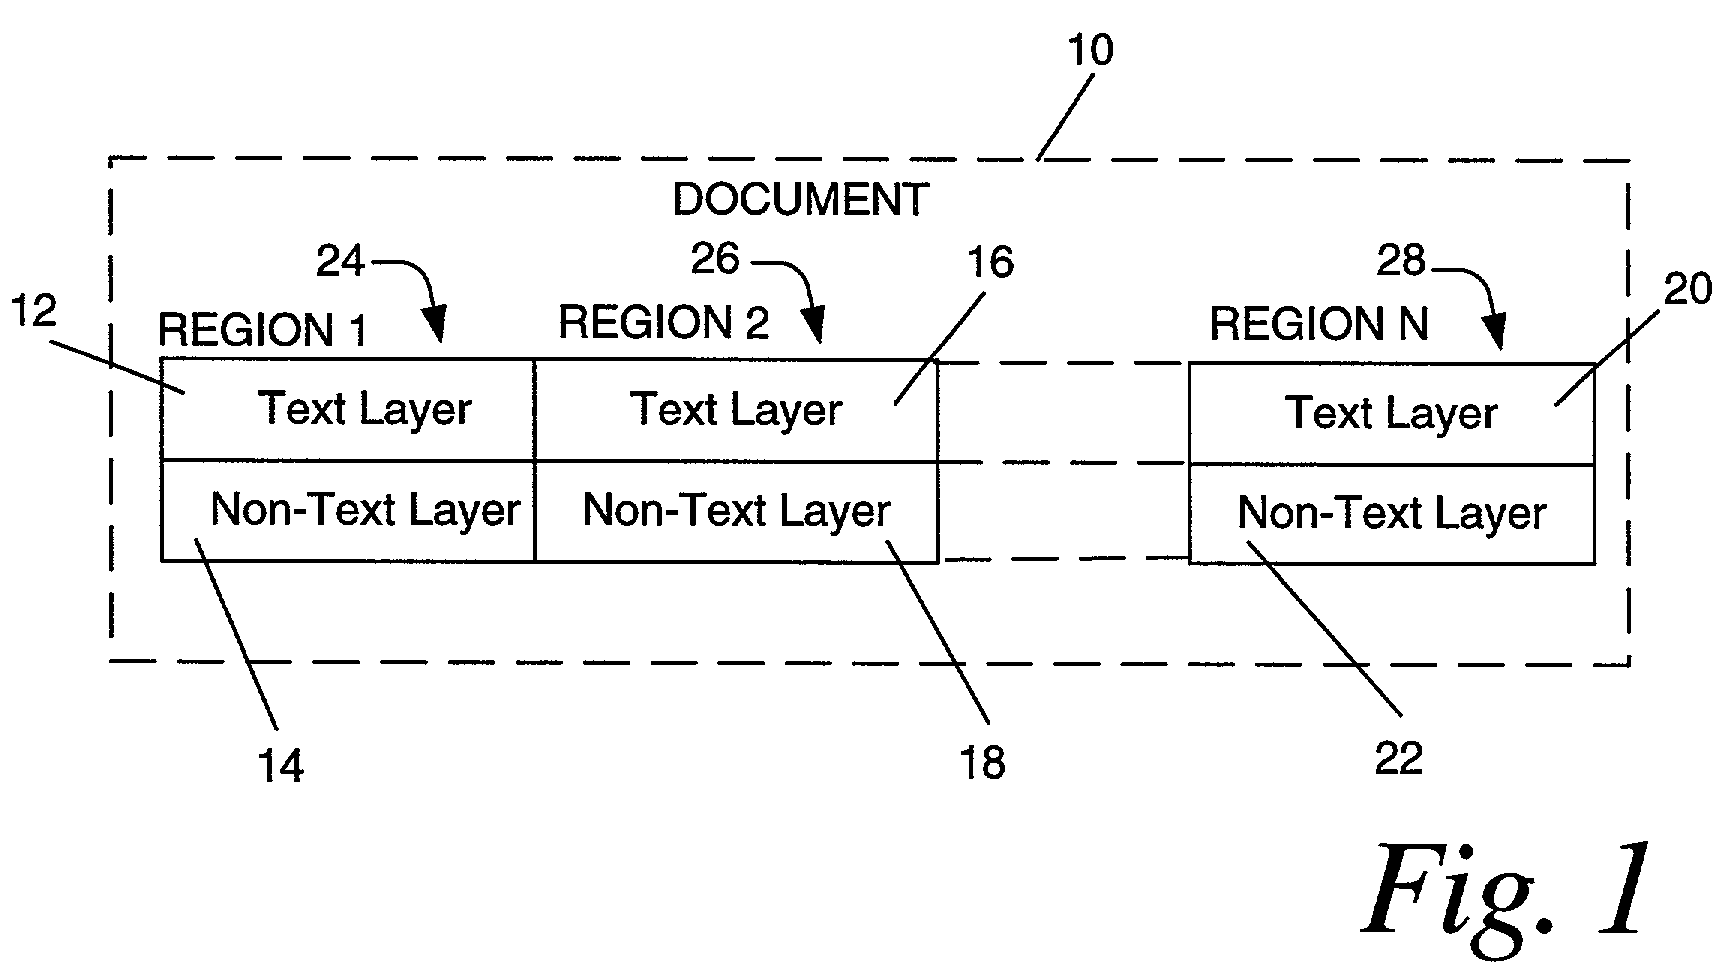 Compound document image compression using multi-region two layer format